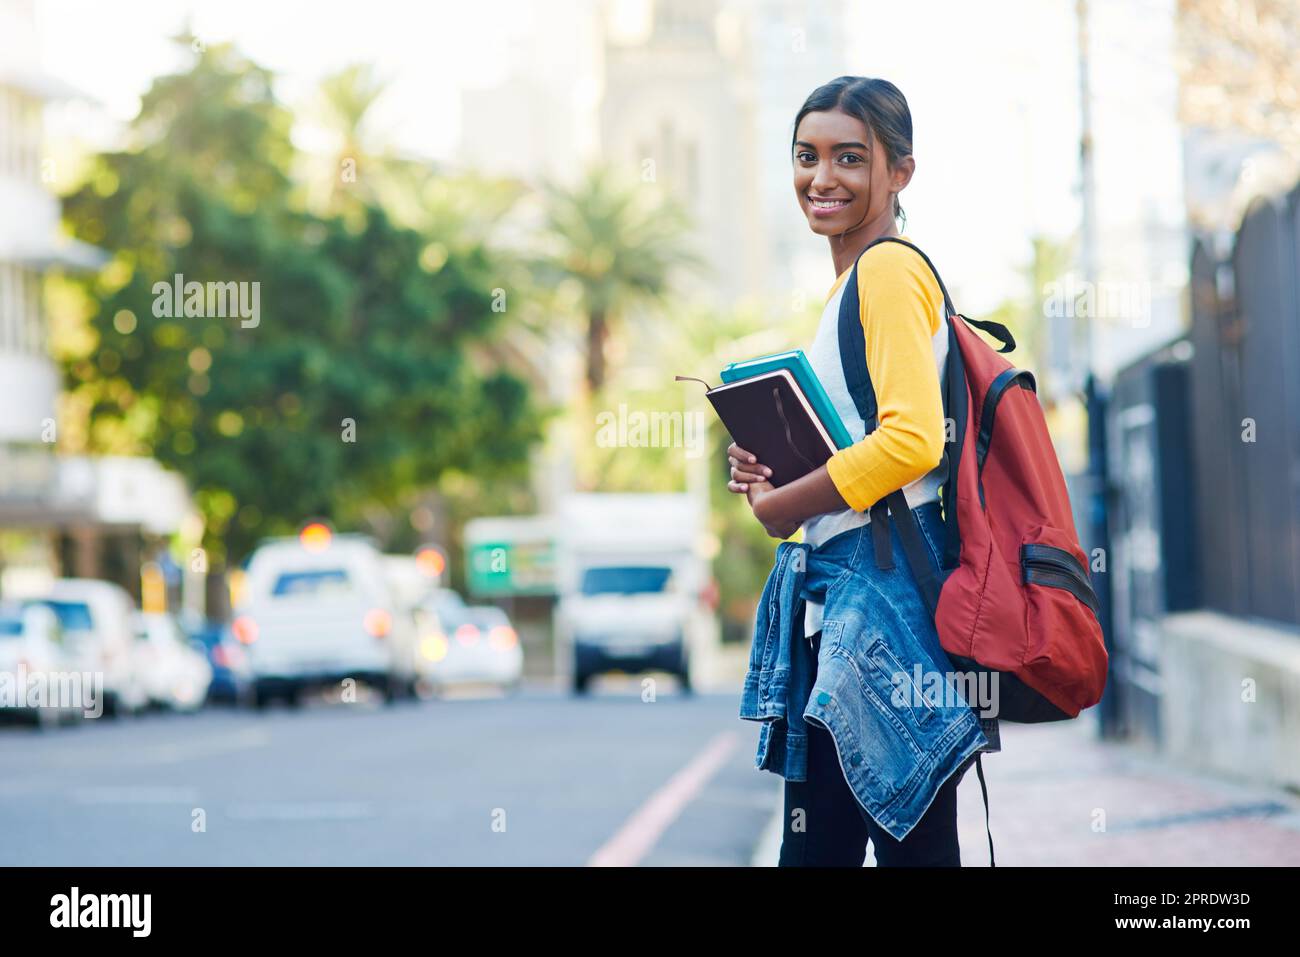 All set and ready to go to college. a young female student commuting to college in the city. Stock Photo